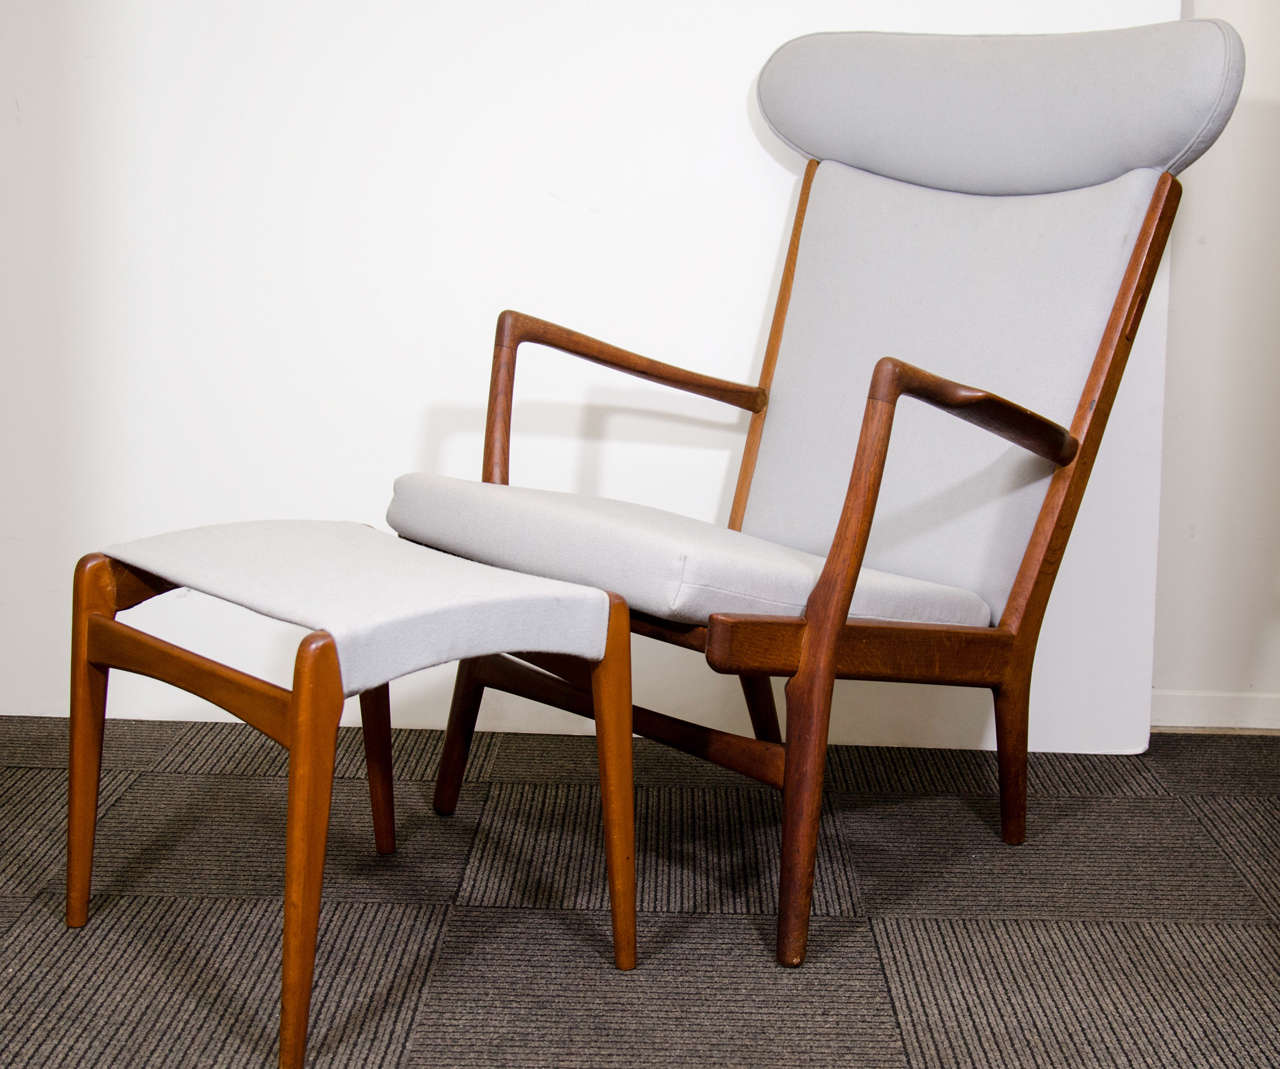 A vintage high back lounge chair by renowned Danish furniture designer Hans Wegner with matching teak ottoman by Fritz Hansen.

Chair
40" H x 30" W x 31" D x 18" S

Ottoman
17" H x 18" L x 15" W

6099